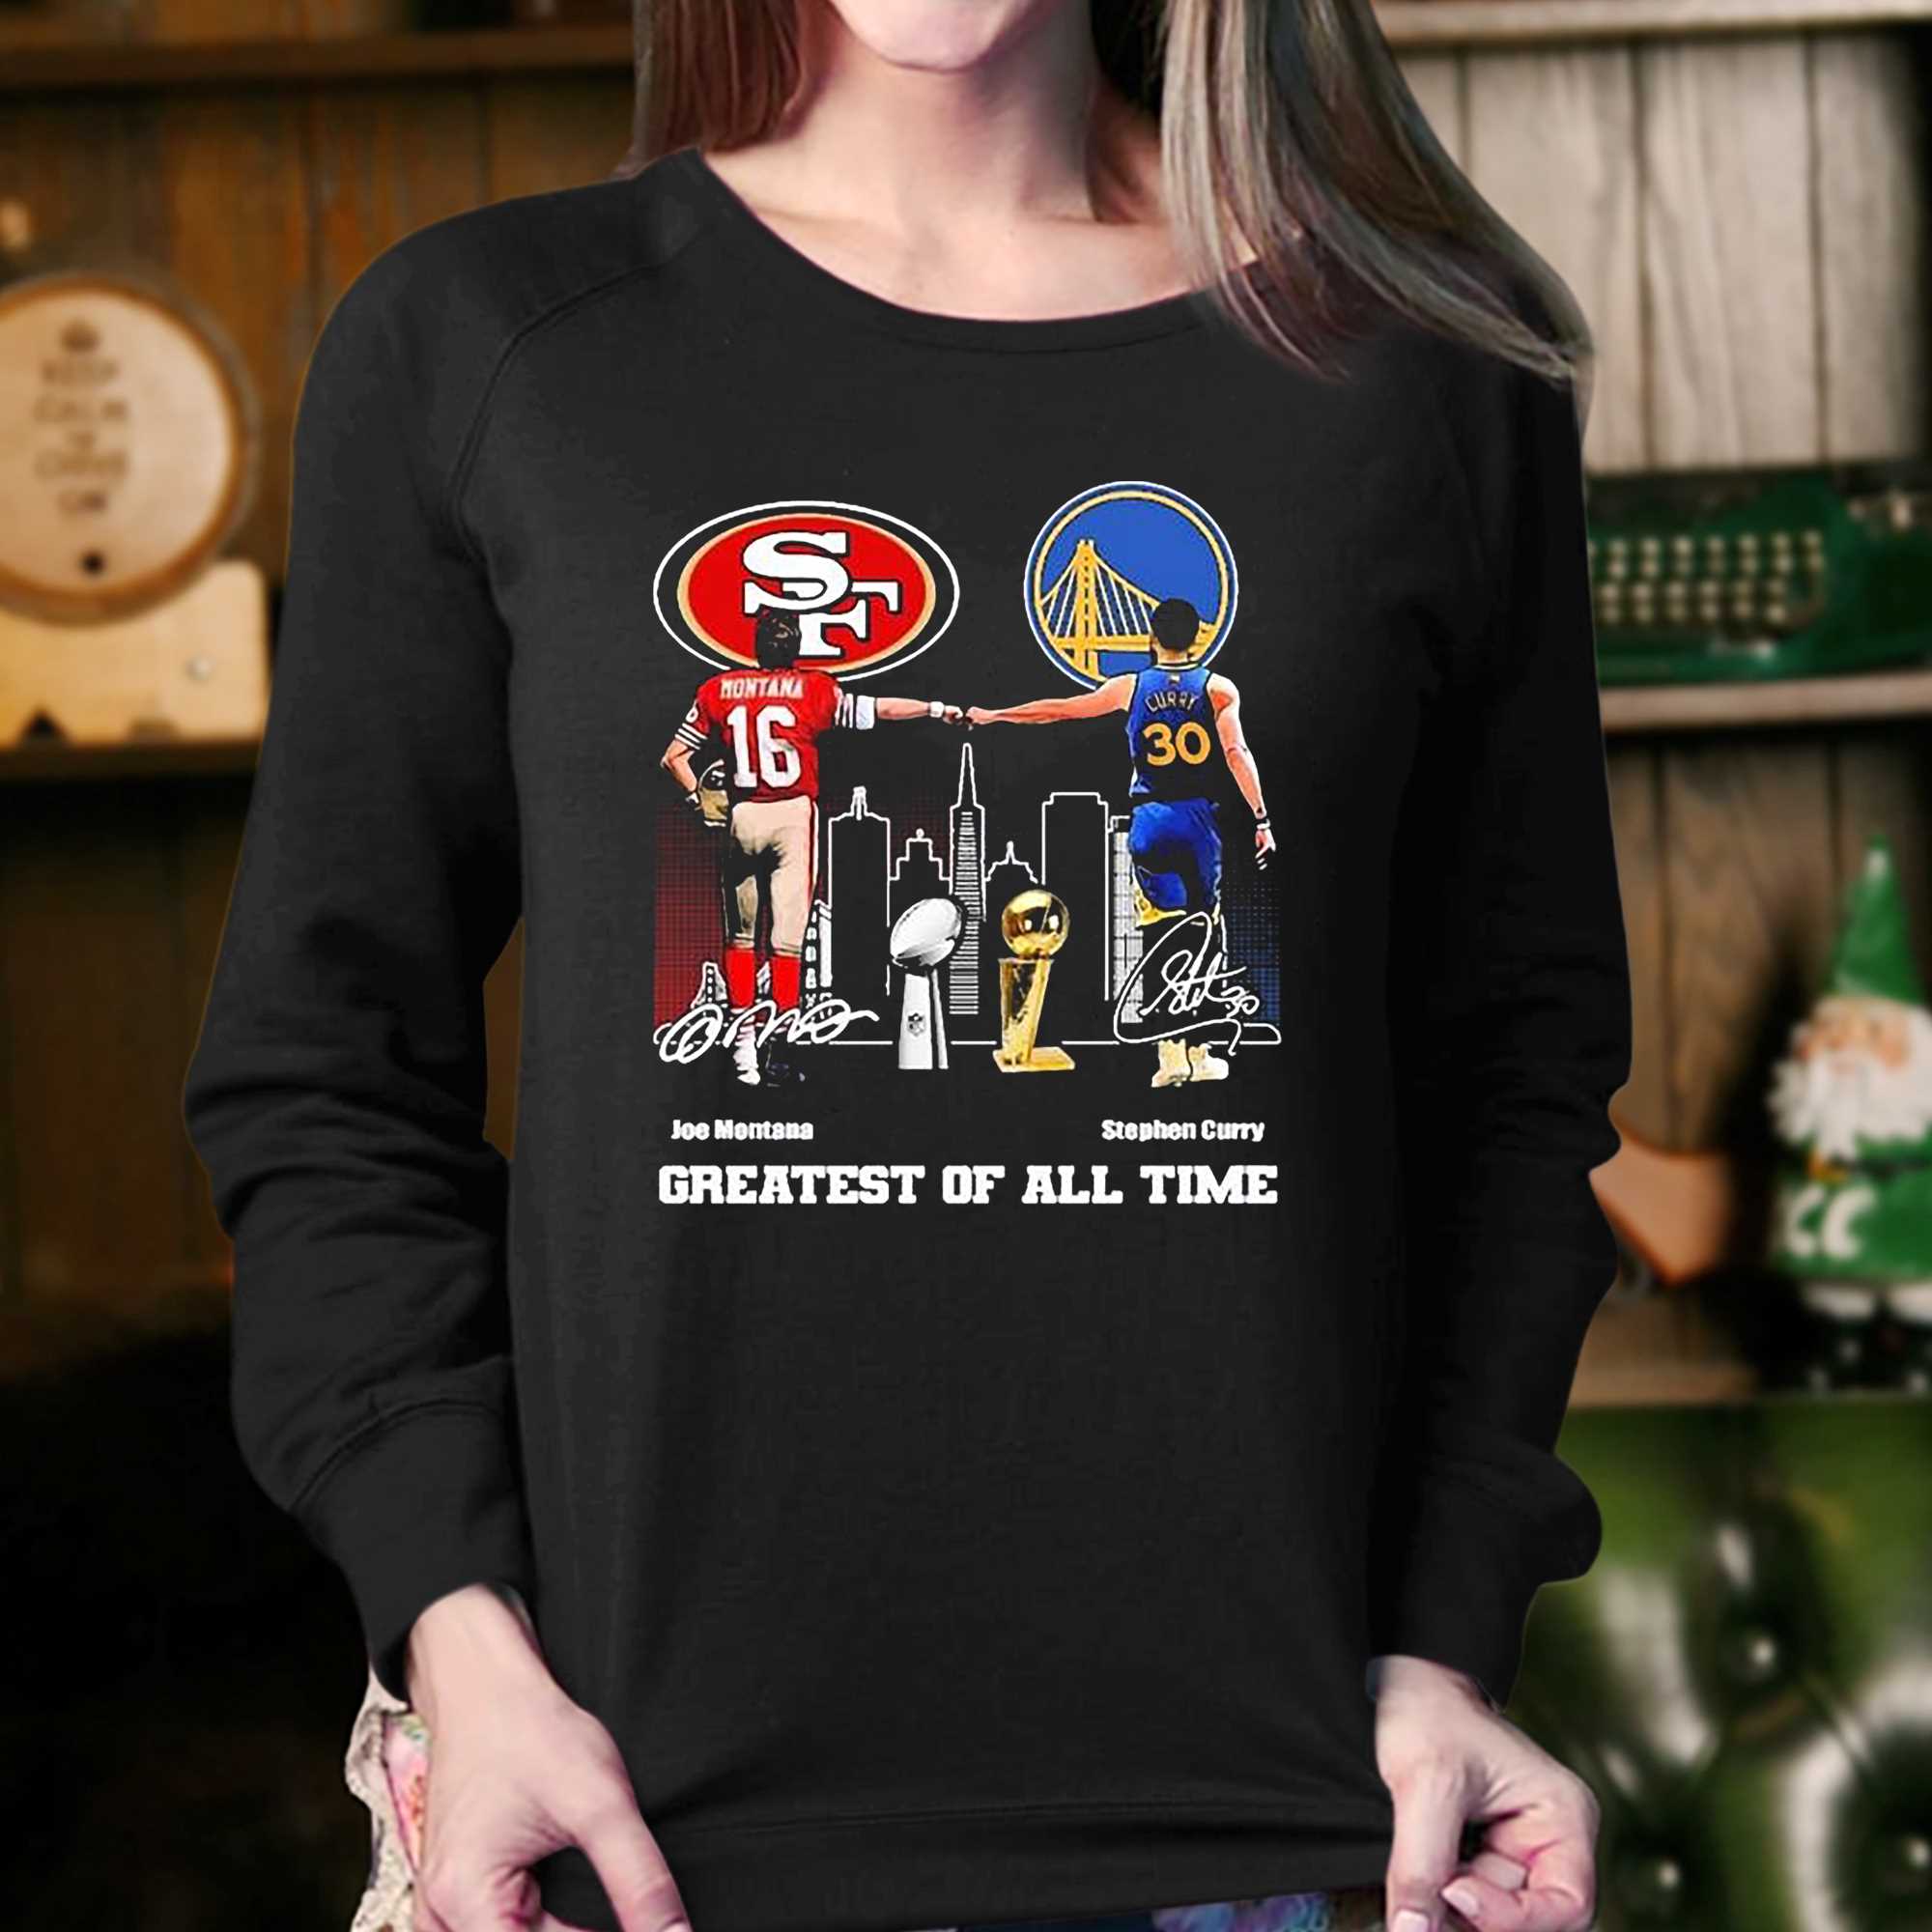 San Francisco Joe Montana And Stephen Curry Greatest Of All Time Signatures  Shirt - Shibtee Clothing